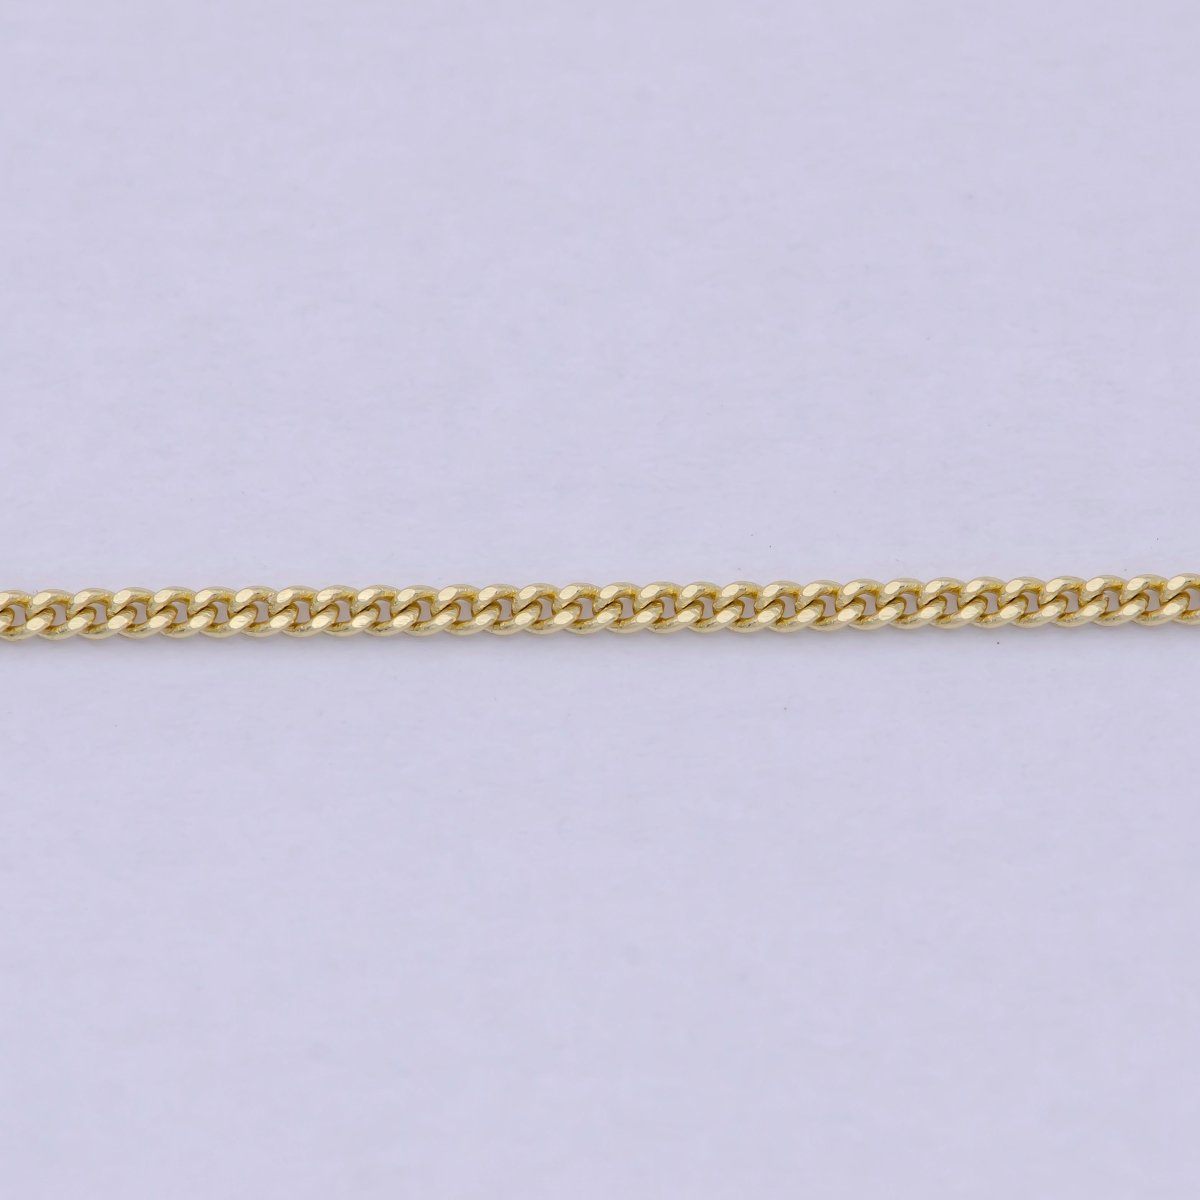 24K Gold Filled Curb Chain Necklace, 17.7 Inch Curb Chain Necklace, Dainty 1mm Link Necklace w/ Lobster Clasp | WA-811 Clearance Pricing - DLUXCA